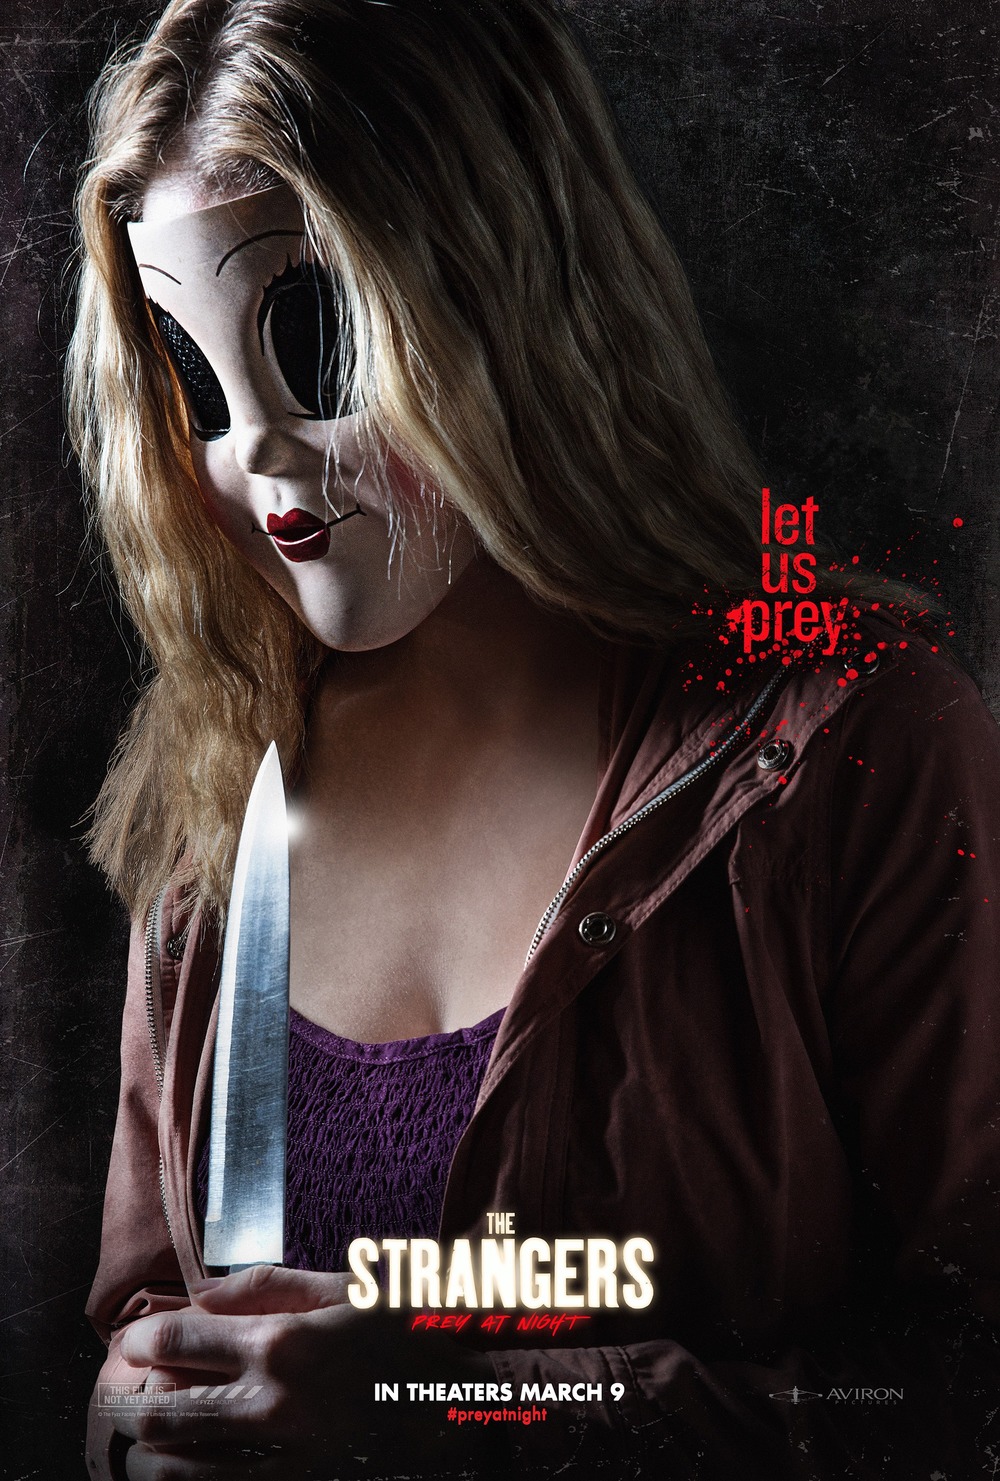 Movies like The Strangers: Prey at Night